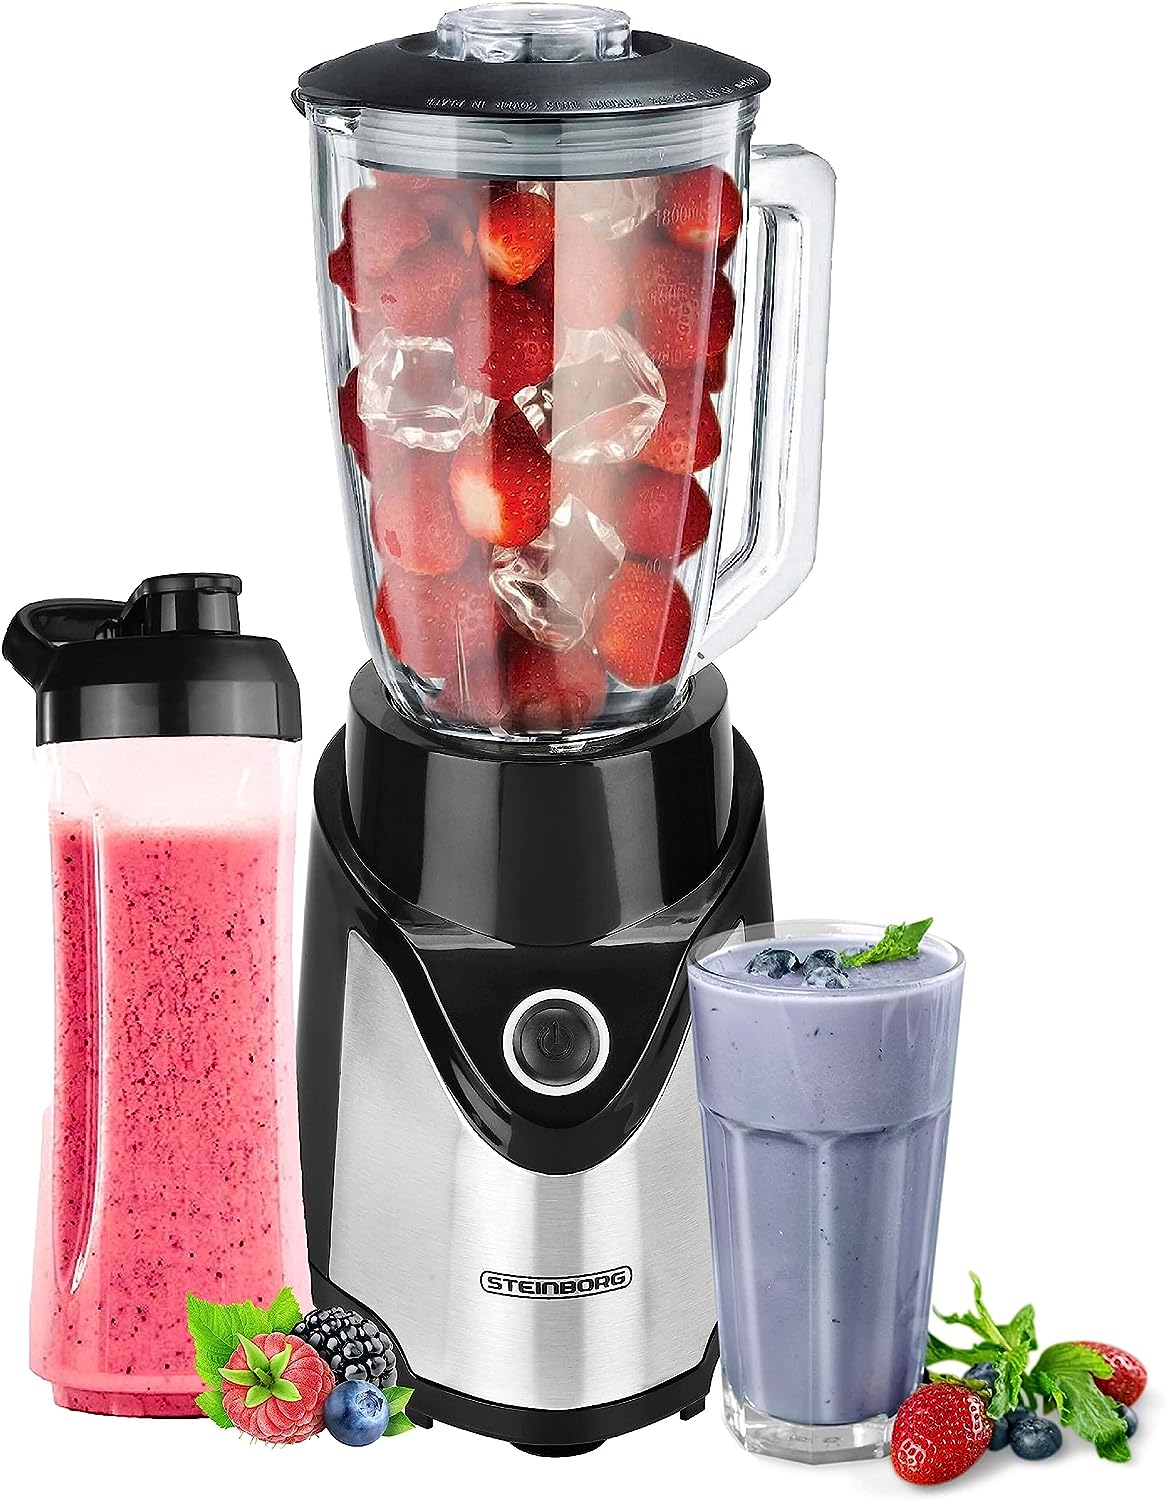 Stand Mixer | 6-Way Metal Knife | 570 ml | 600 ml To-Go Cup | Pulse Function | 500 Watt | Glass Stainless Steel | Universal Power Mixer | Ice Crusher | Protein Shaker | Chopper | Smoothie Maker